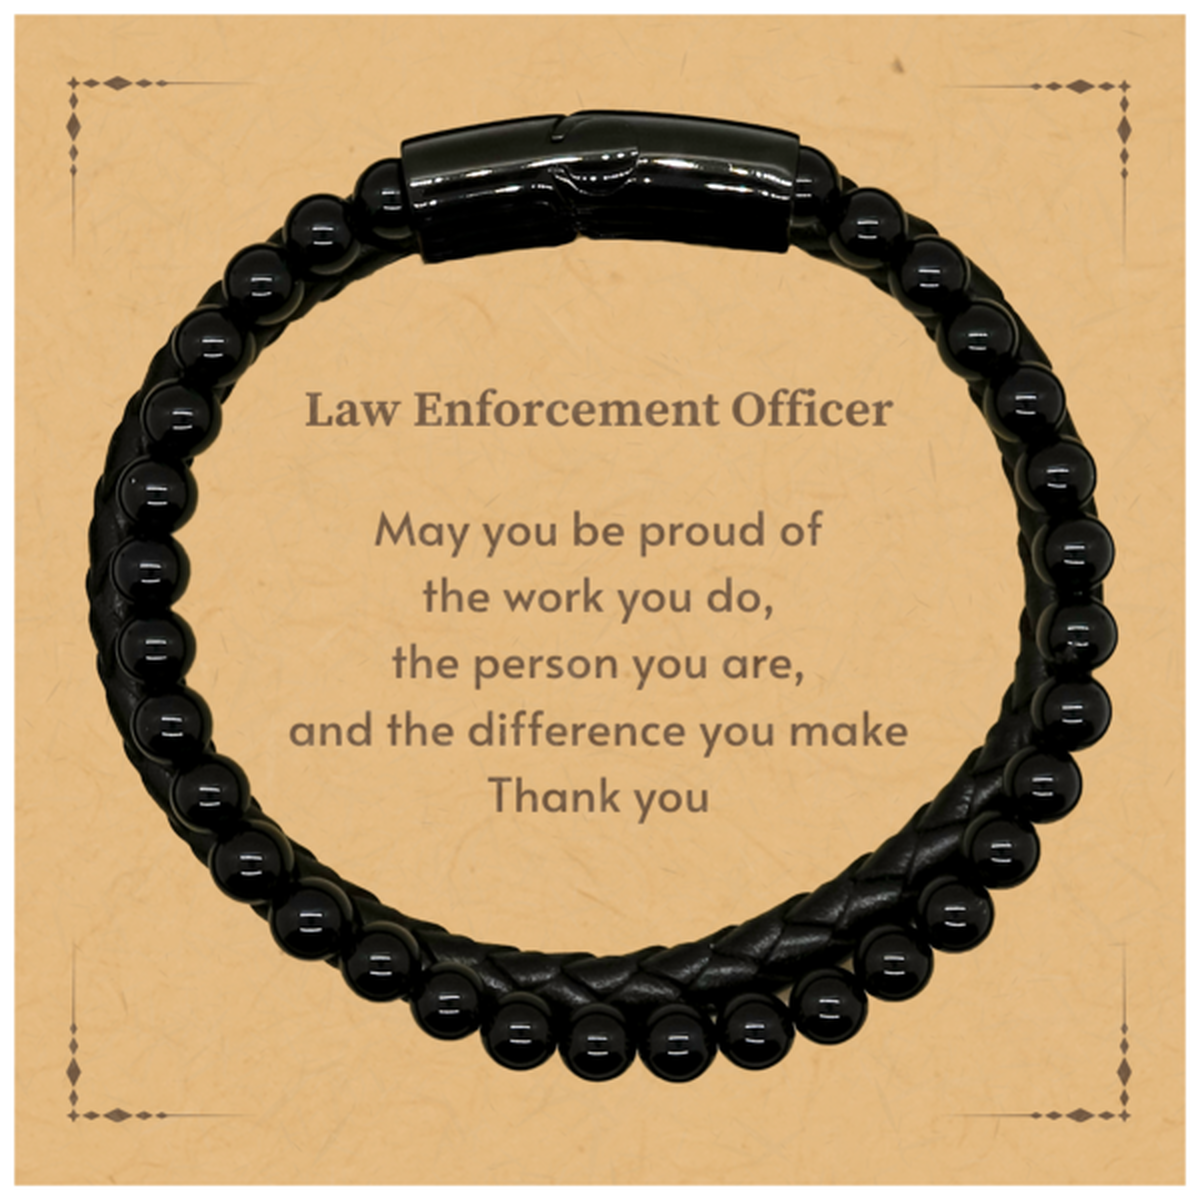 Heartwarming Stone Leather Bracelets Retirement Coworkers Gifts for Law Enforcement Officer, Law Enforcement Officer May You be proud of the work you do, the person you are Gifts for Boss Men Women Friends